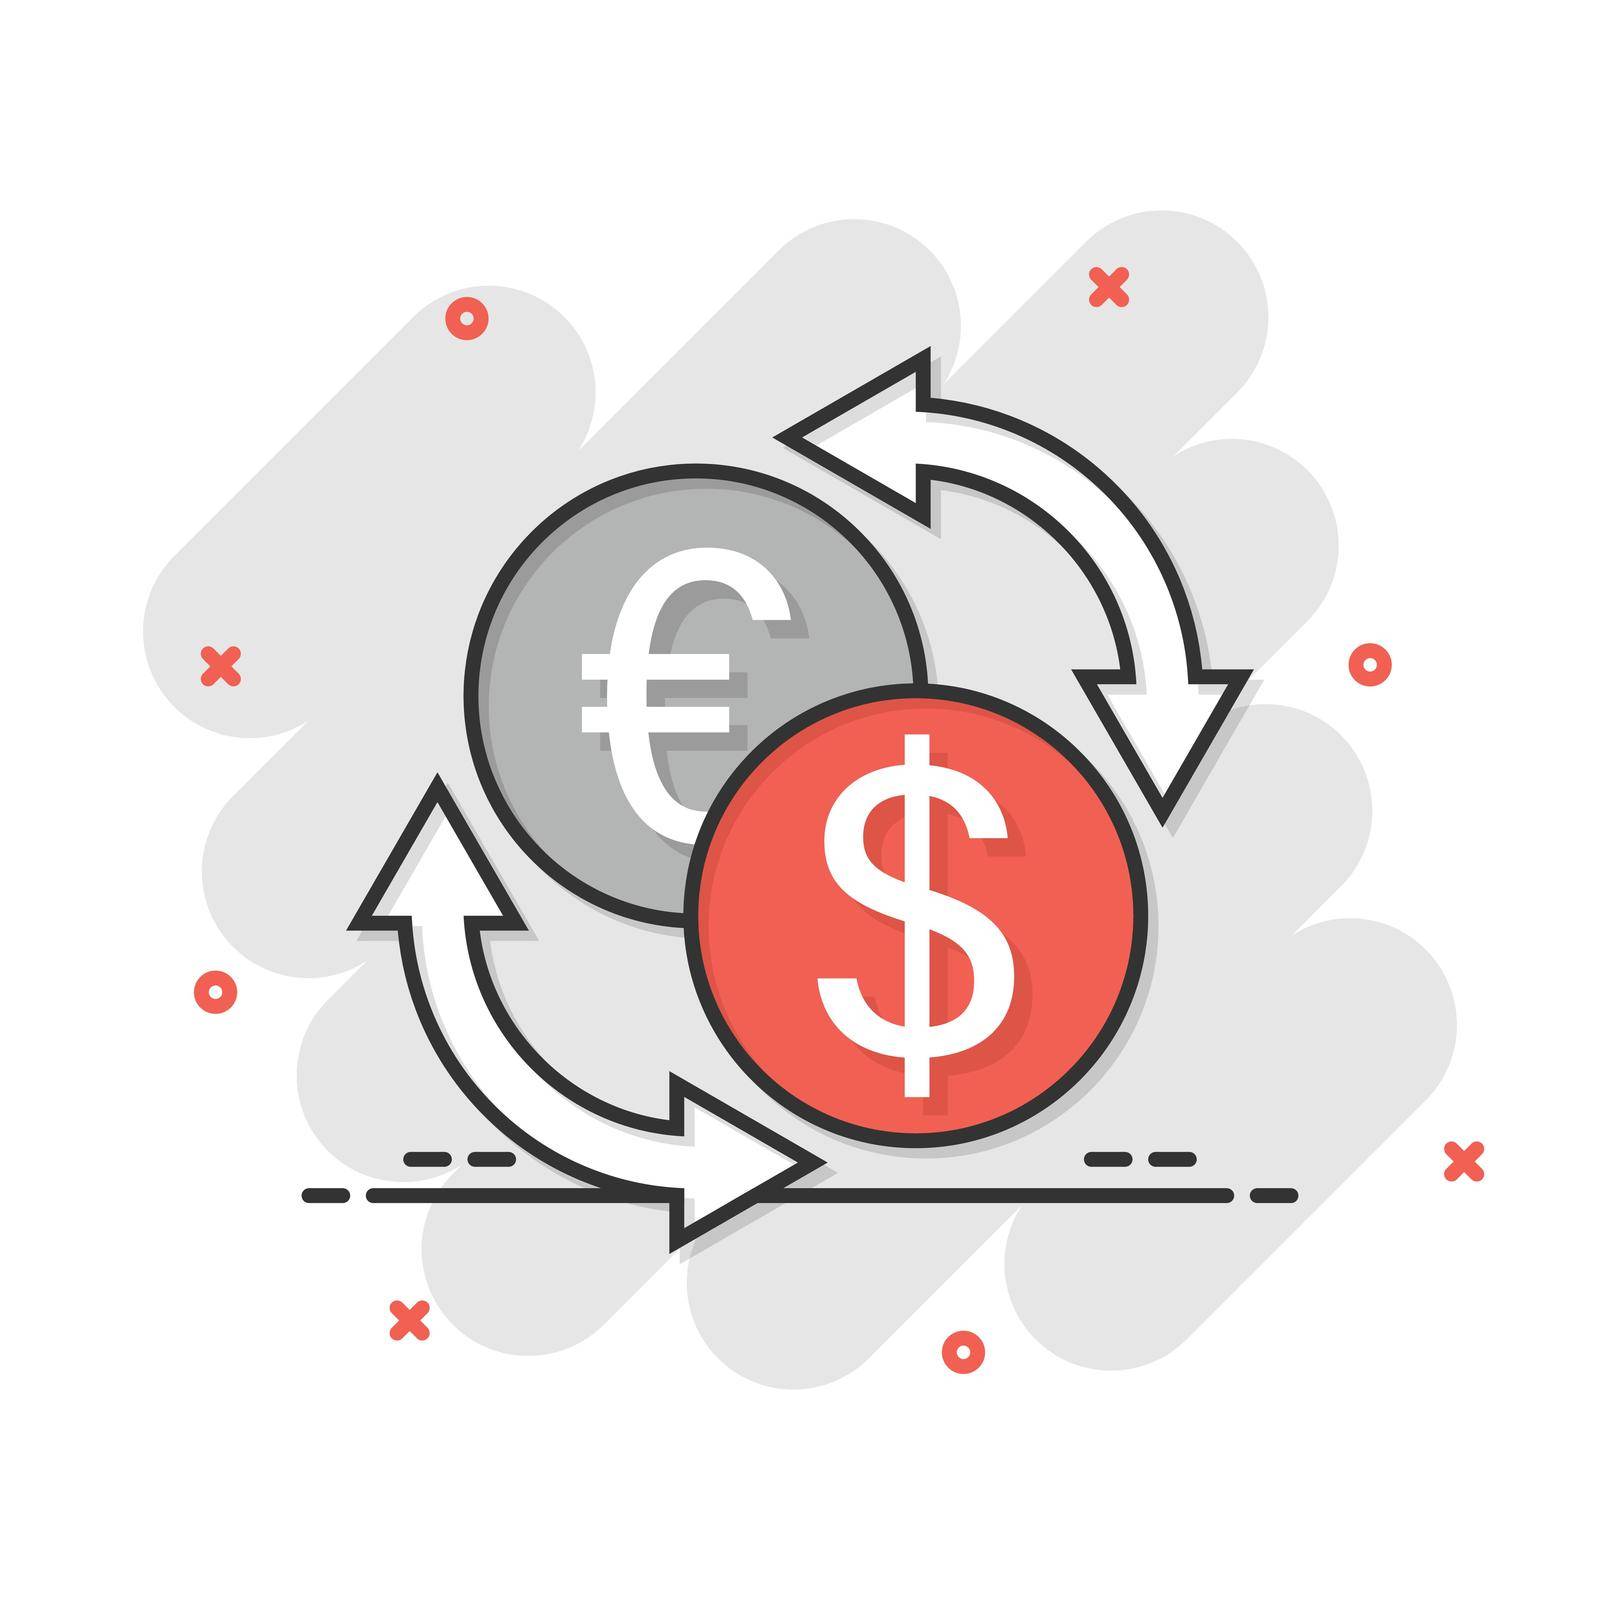 Currency exchange icon in comic style. Dollar euro transfer cartoon vector illustration on white isolated background. Financial process splash effect business concept.